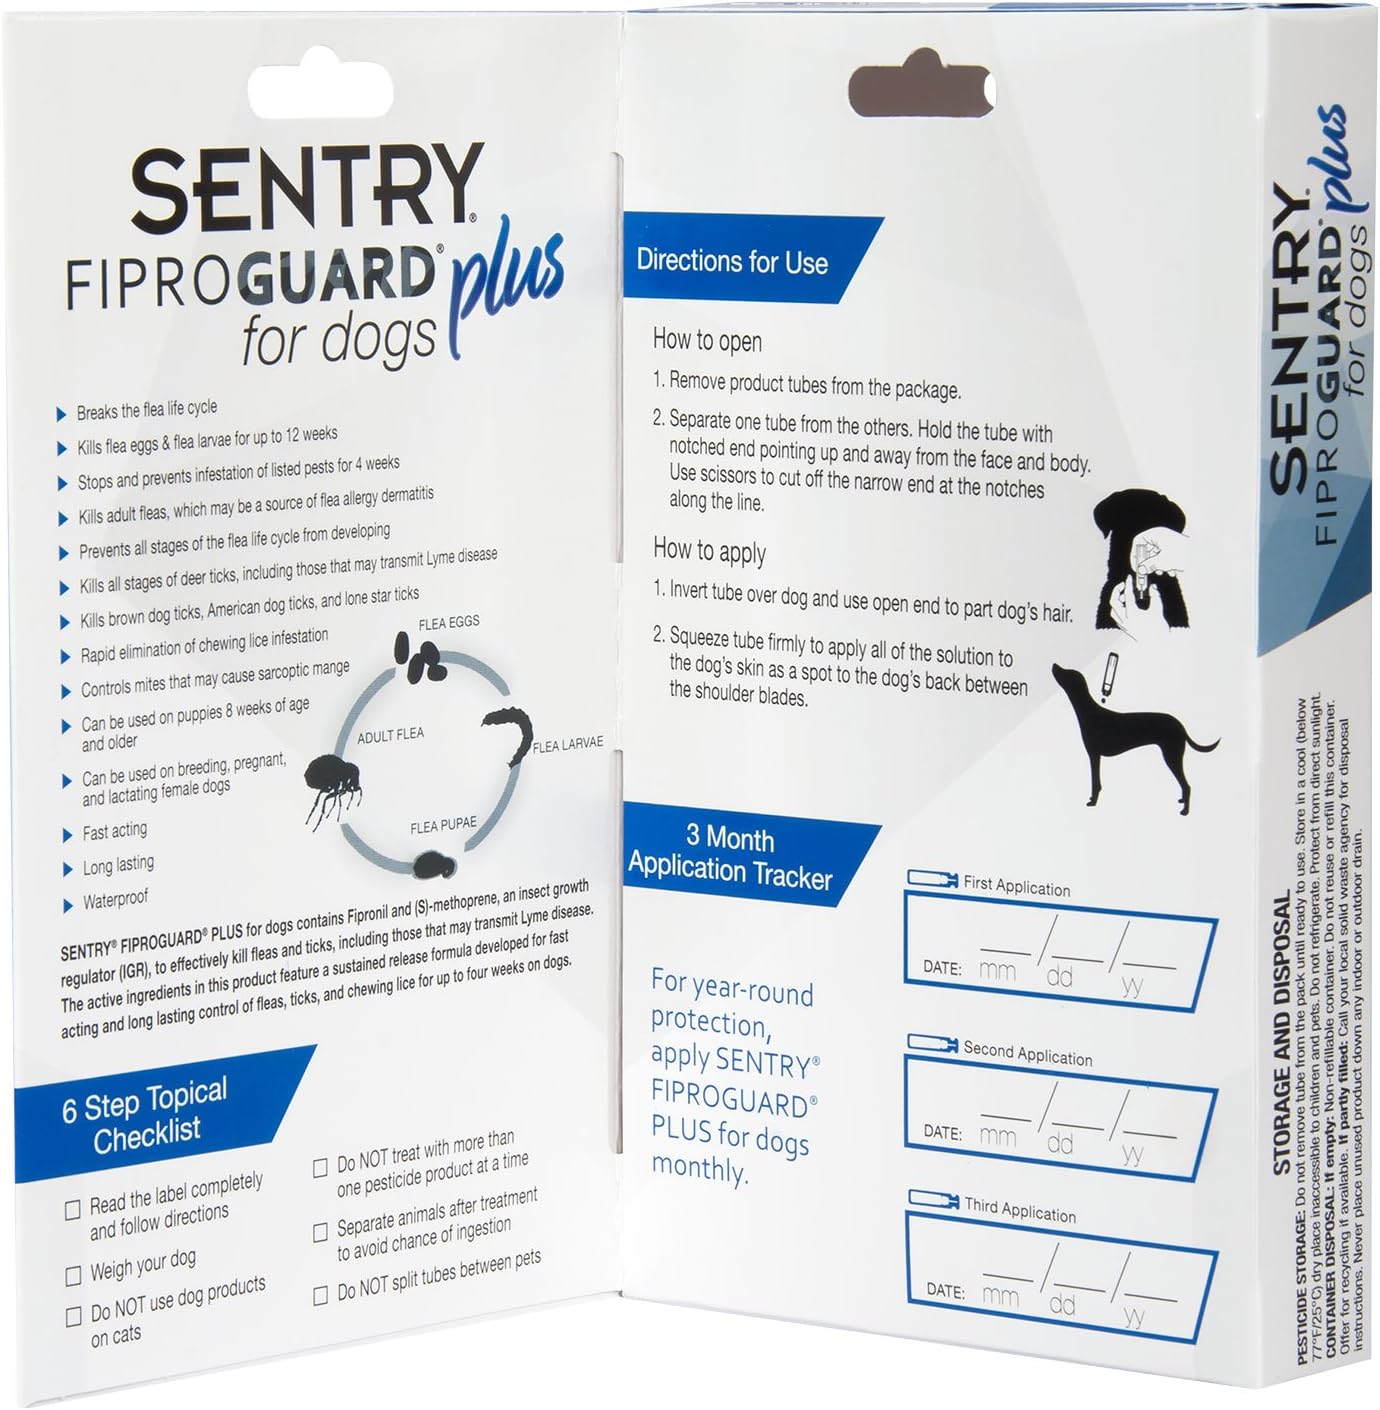 SENTRY Fiproguard Plus for Dogs, Flea and Tick Prevention for Dogs (45-88 Pounds), Includes 3 Month Supply of Topical Flea Treatments